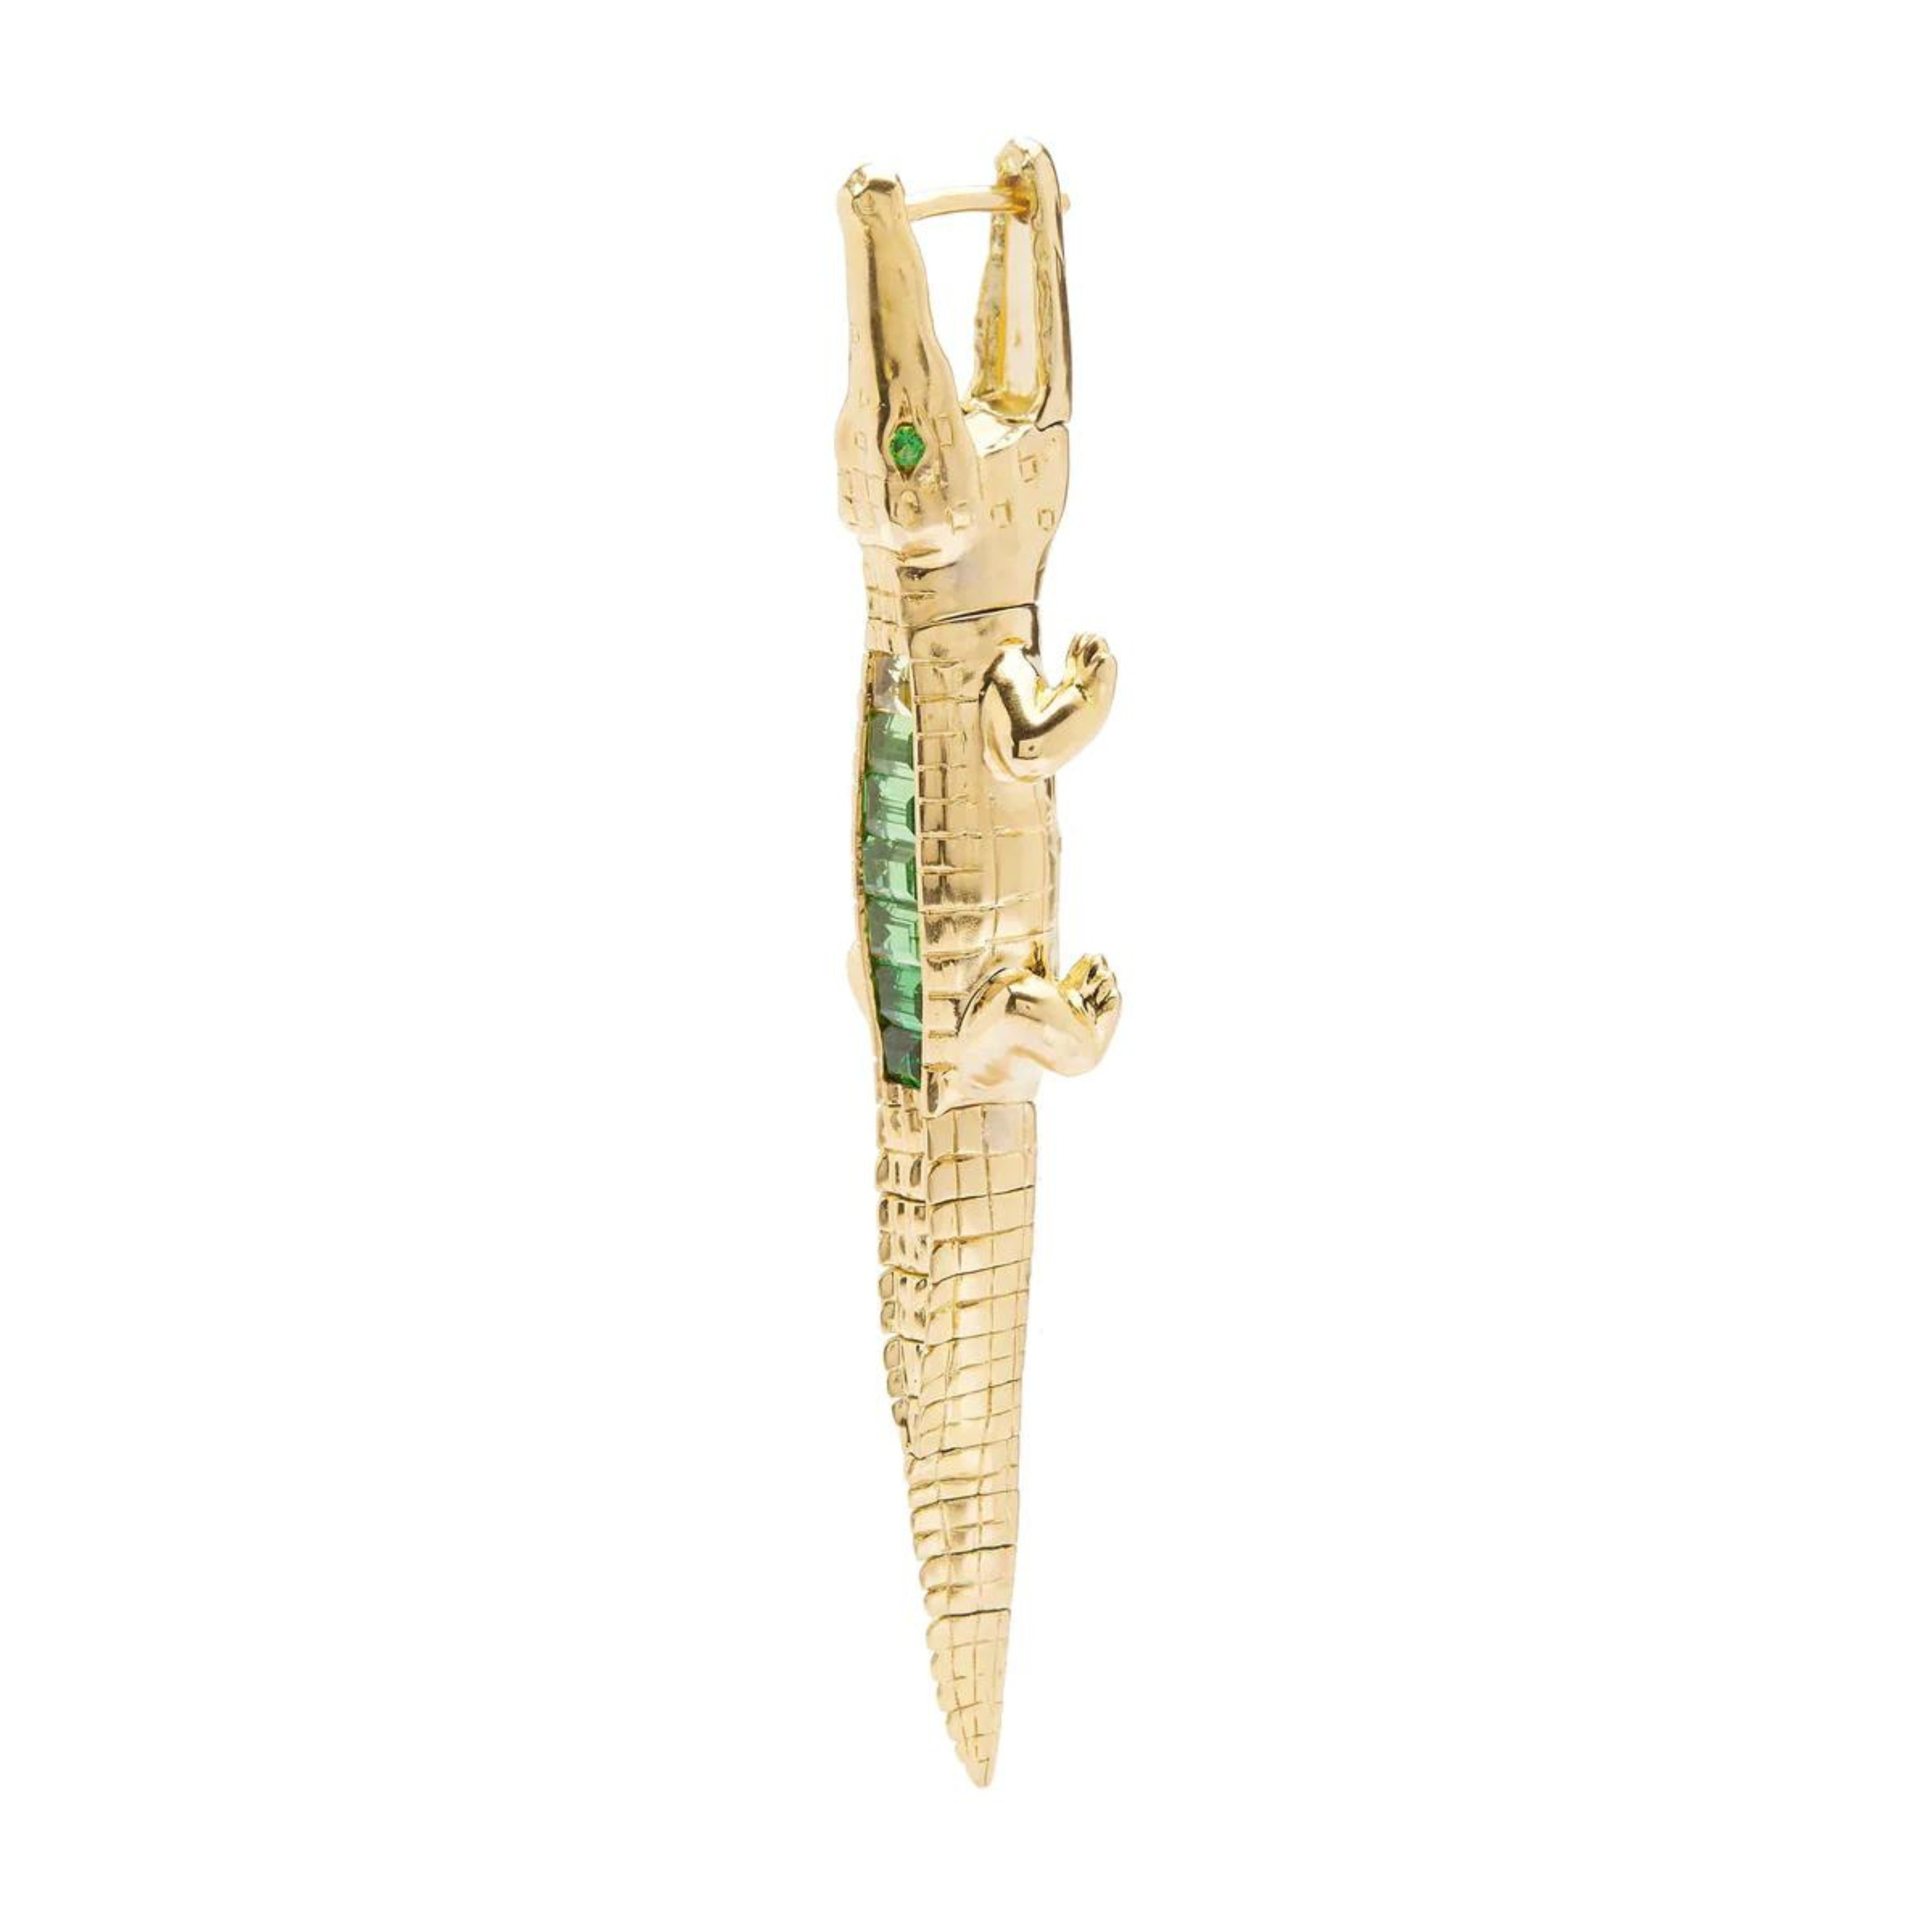 Bibi ven der Velden, Tsavorite Alligator Ear Bite Earring  Crafted in 18K yellow gold and featuring an arrangement of green tsavorites, the intricately carved design replicates an alligator's body. Shown from the side.